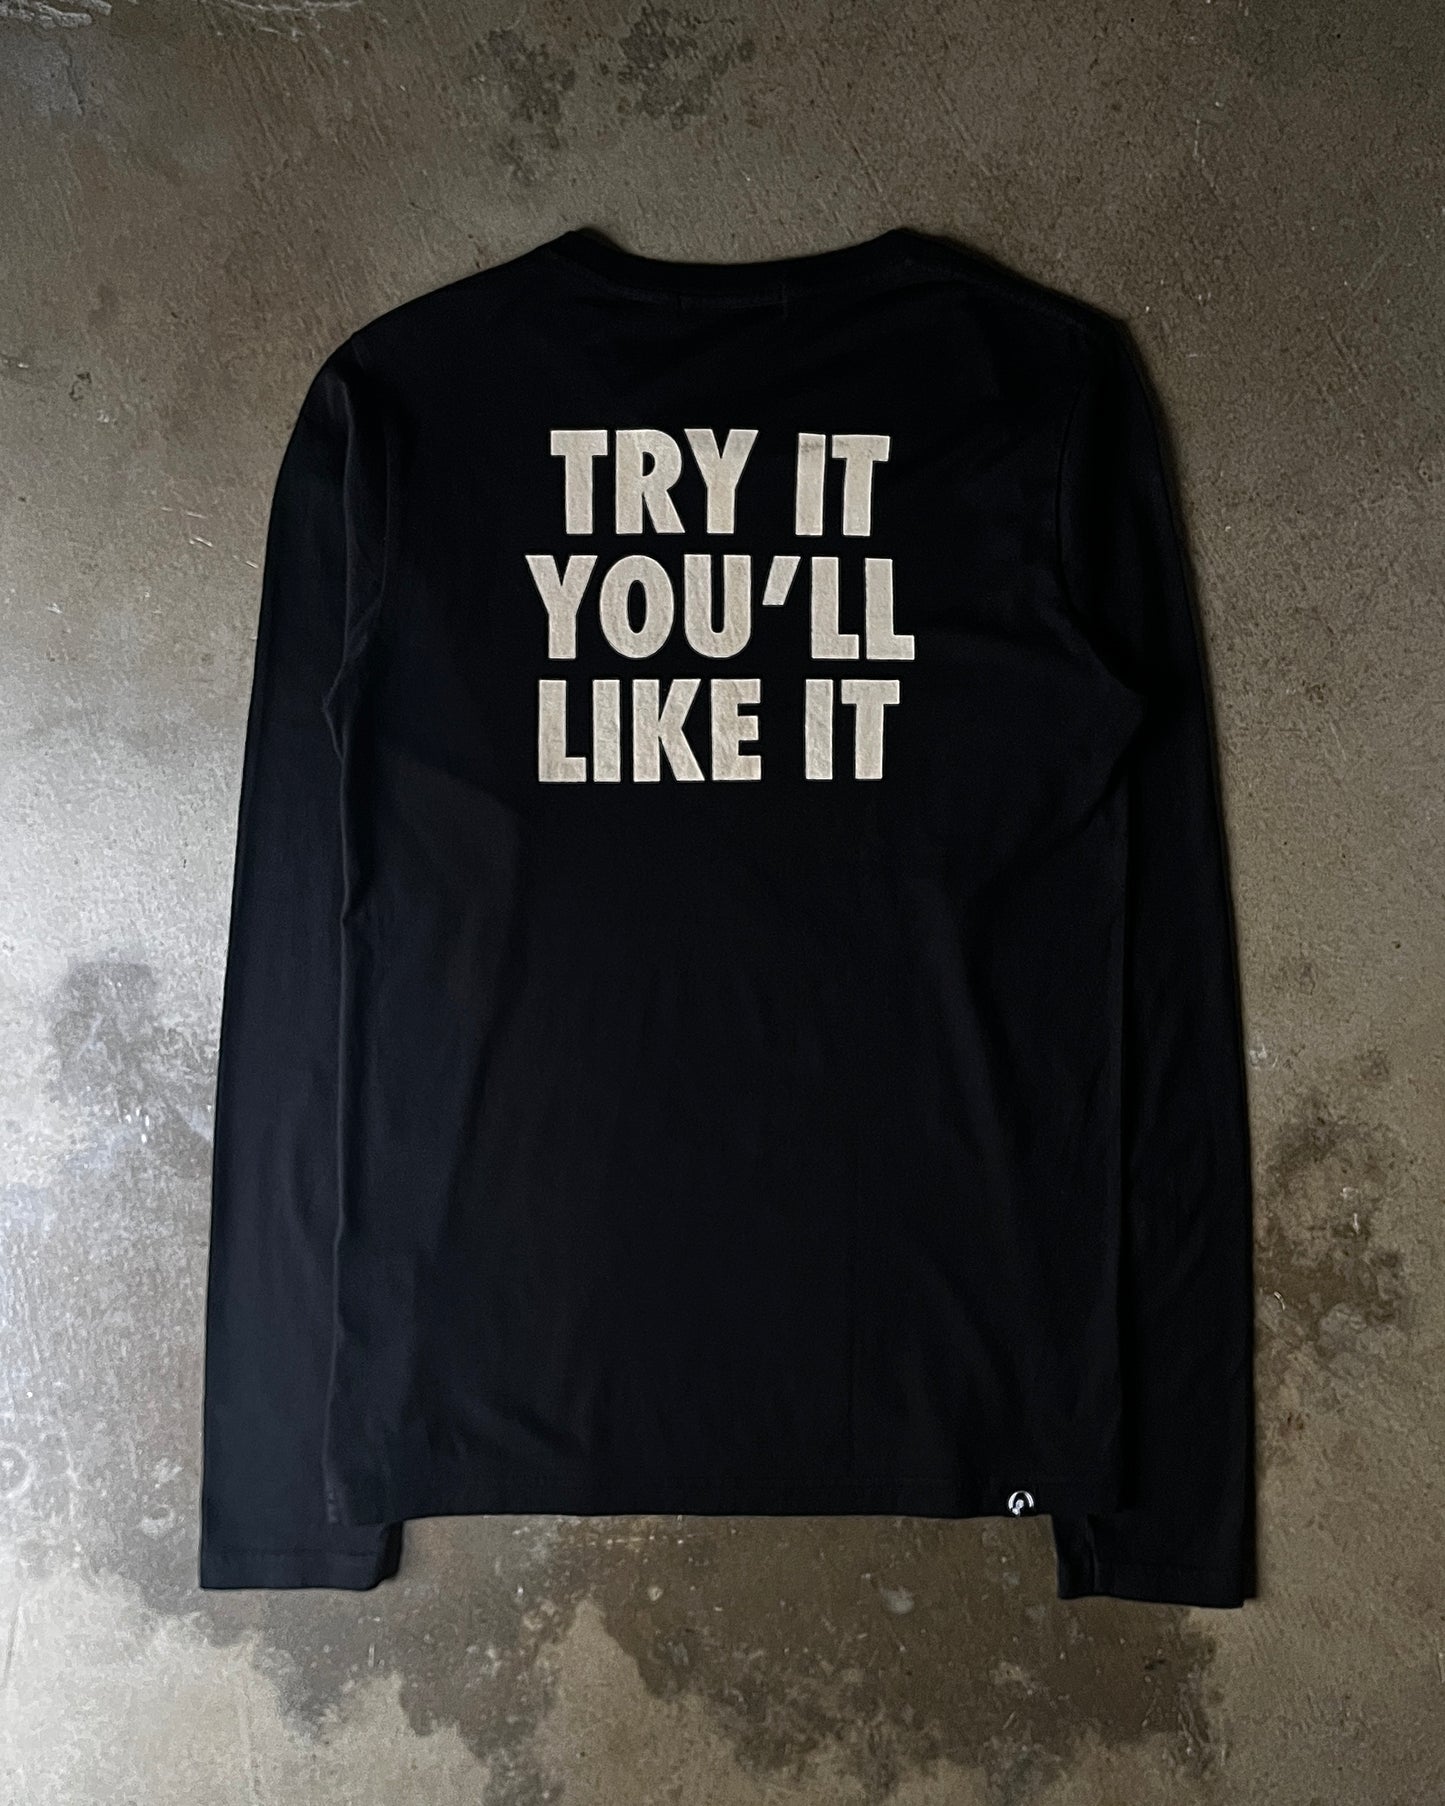 Hysteric Glamour "Try It You'll Like It" Longsleeve